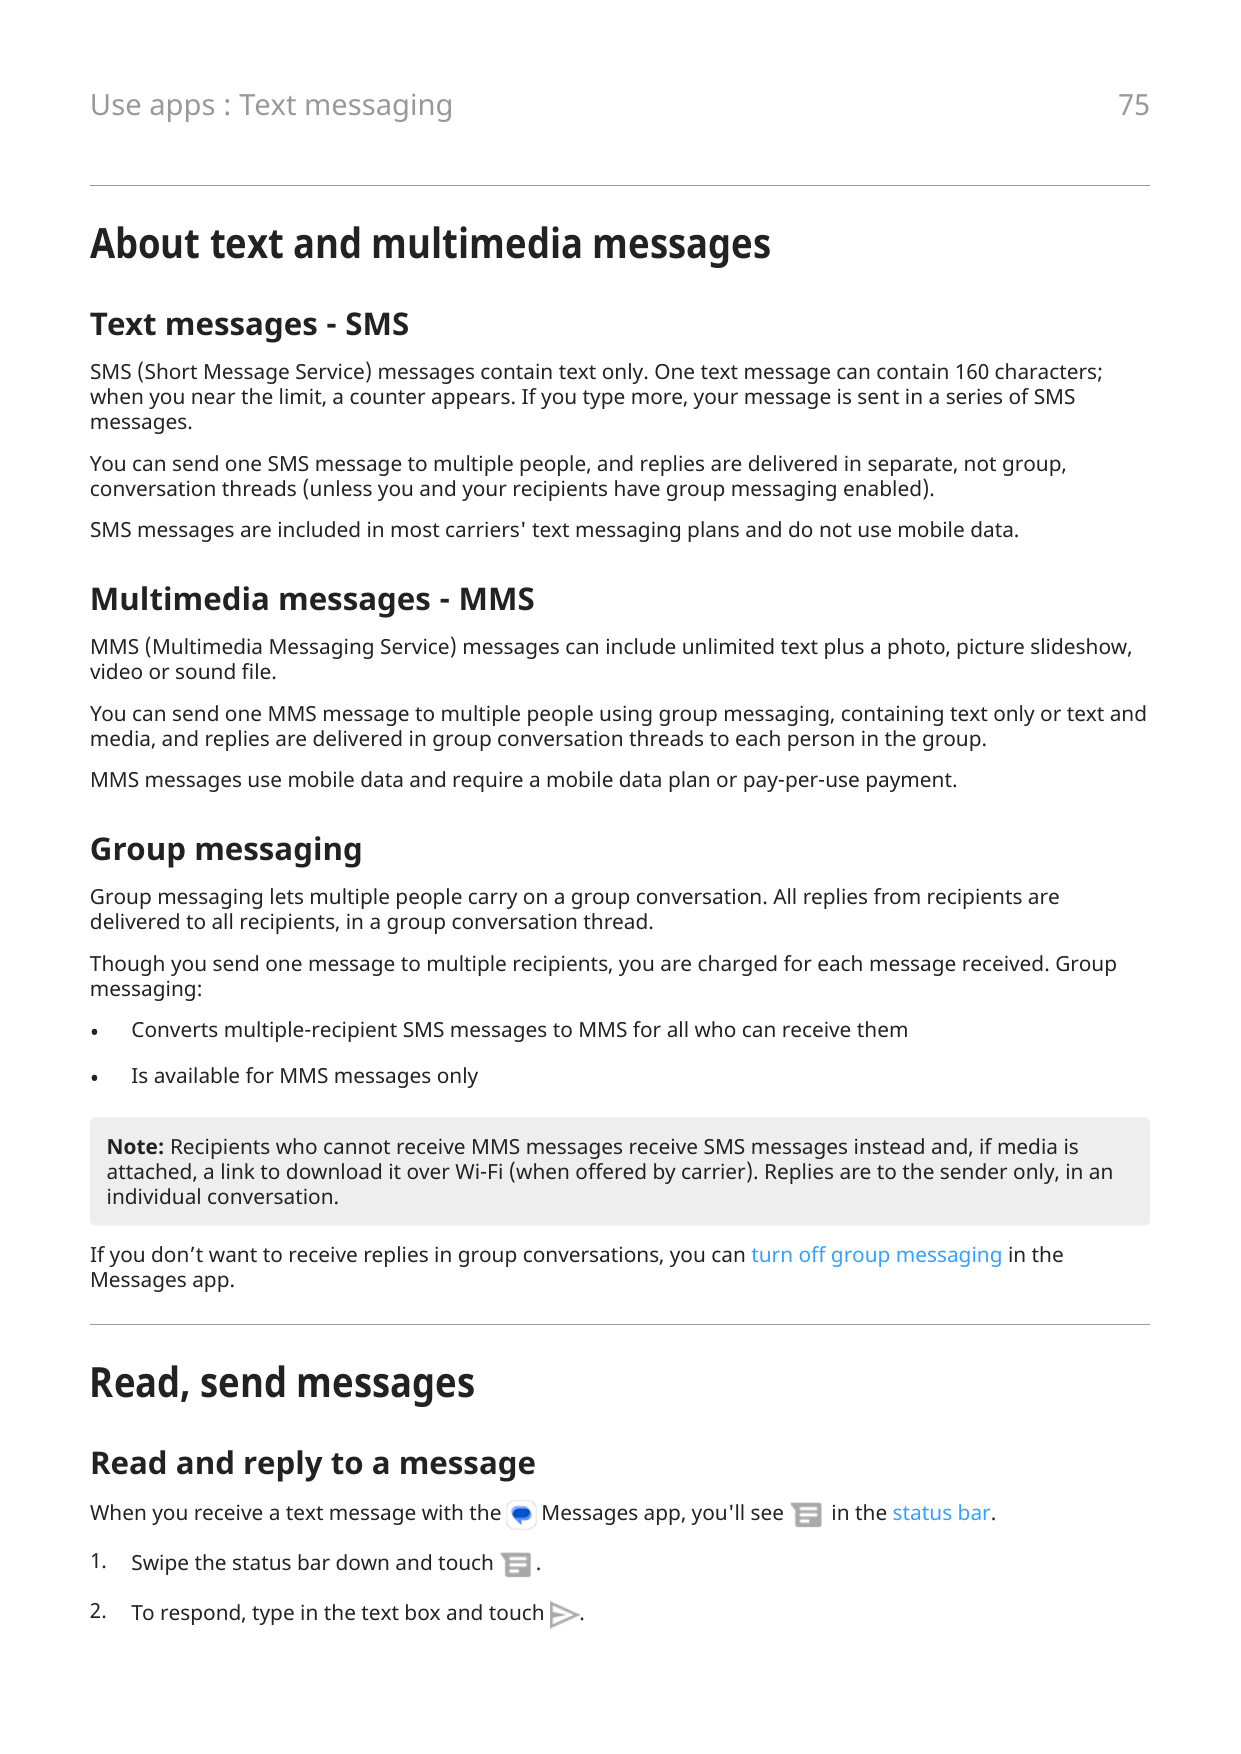 75Use apps : Text messagingAbout text and multimedia messagesText messages - SMSSMS (Short Message Service) messages contain tex